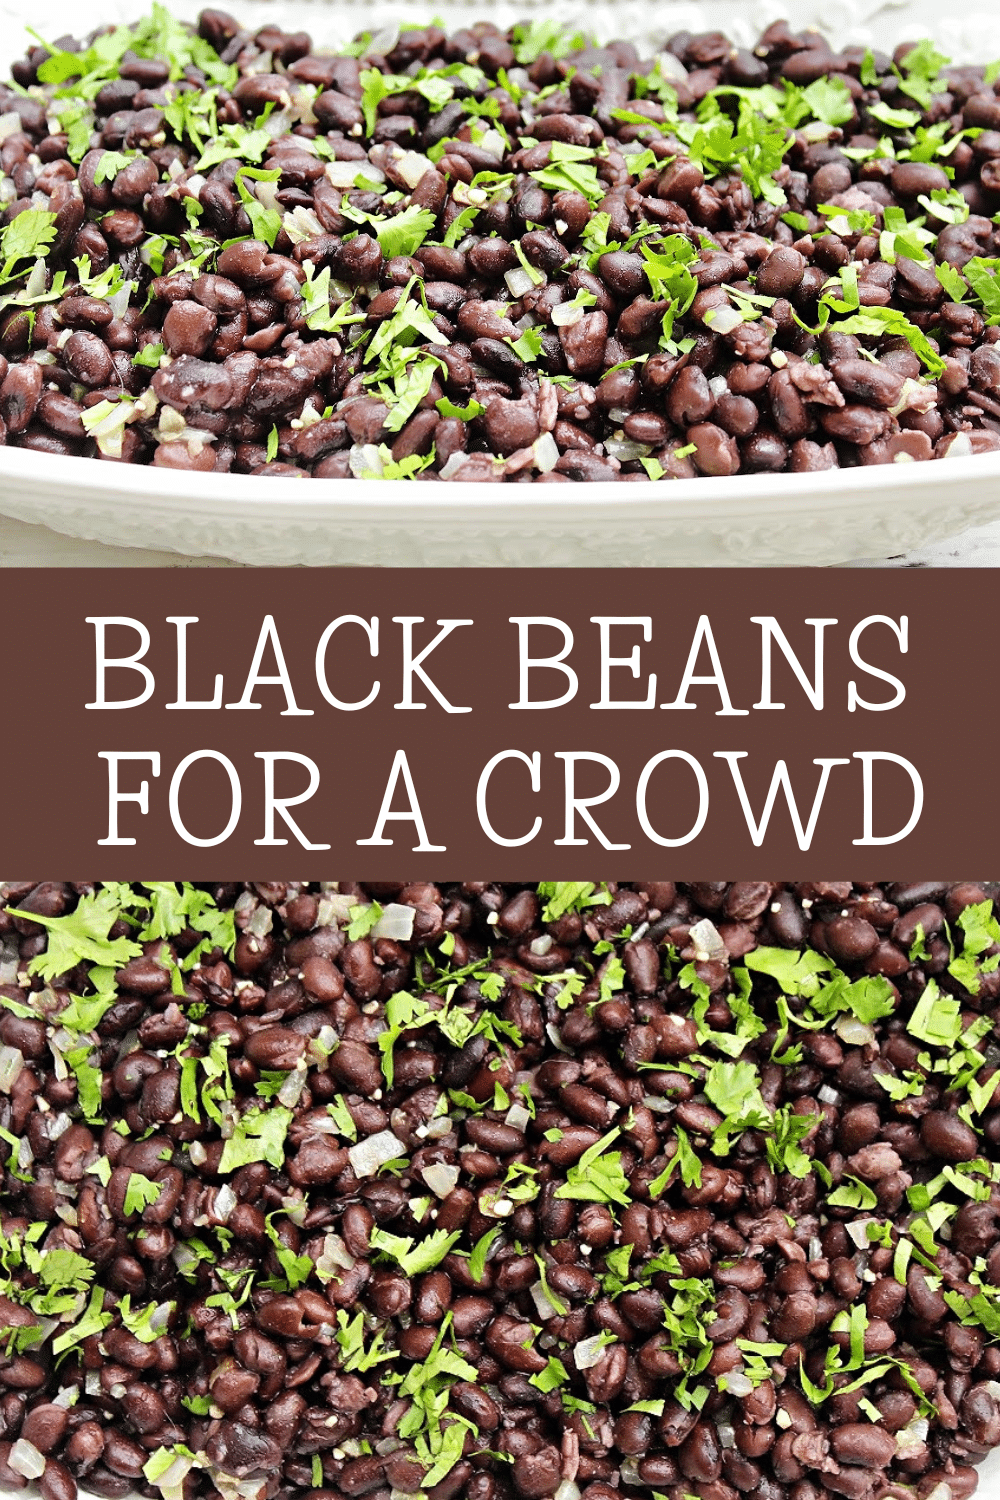 Black Beans for a Crowd ~ Perfect for Cinco de Mayo, weekly meal prep, or Taco Tuesday. Ready to serve in about 20 minutes! via @thiswifecooks